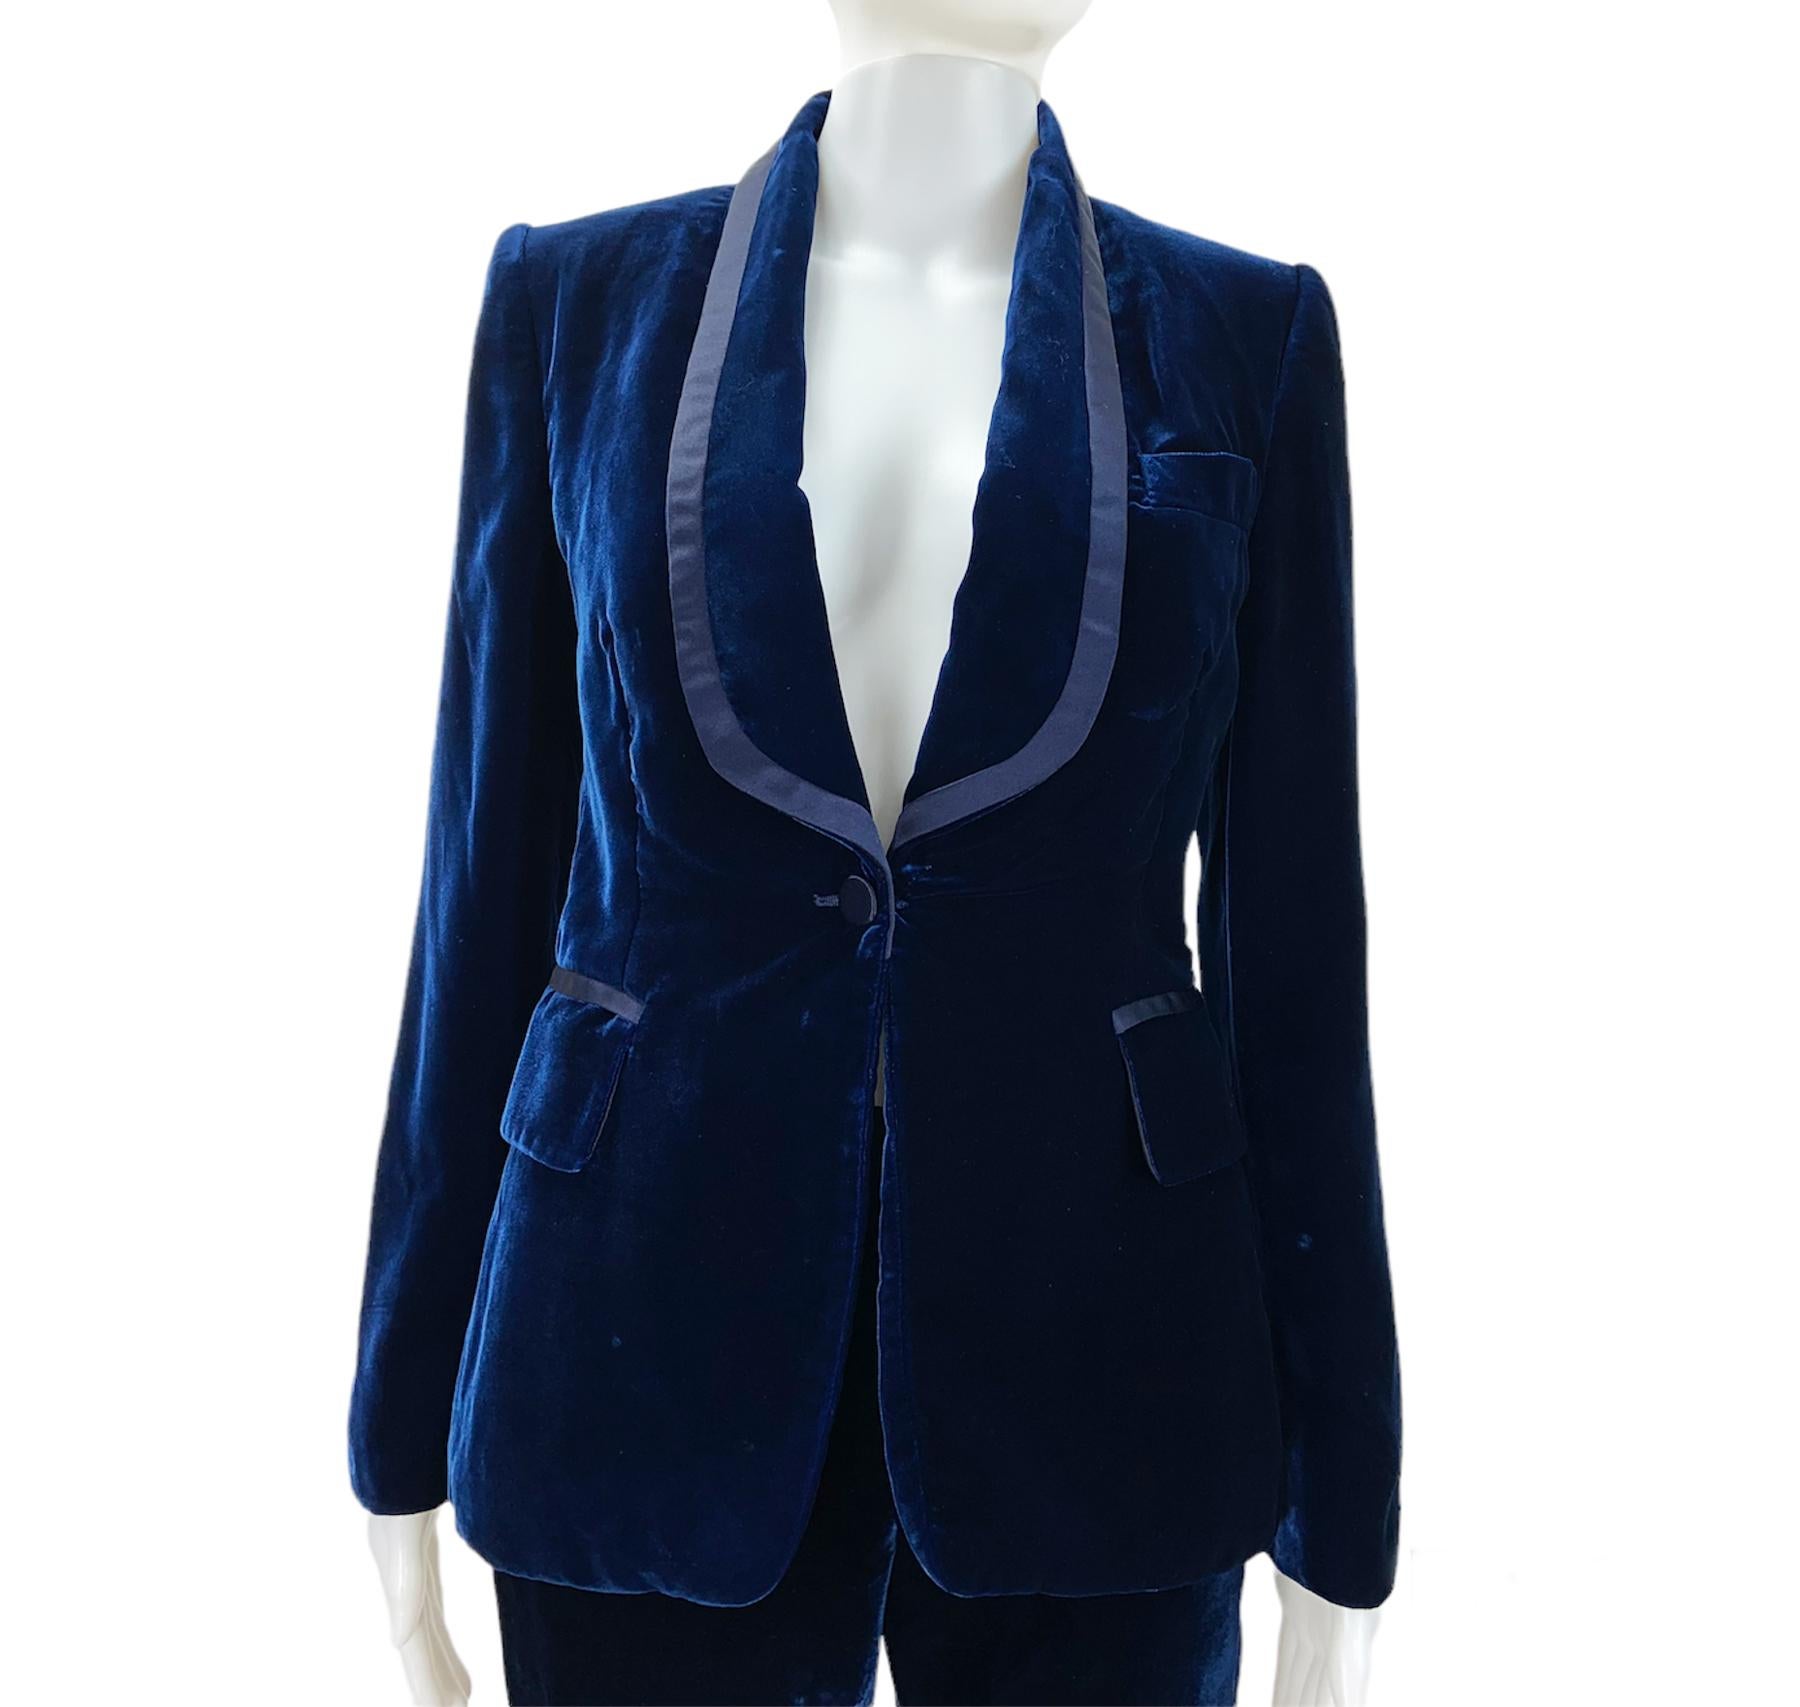 Iconic Tom Ford for Gucci Runway FW 2004 Blue Velvet Tuxedo Pant Suit It 38 1